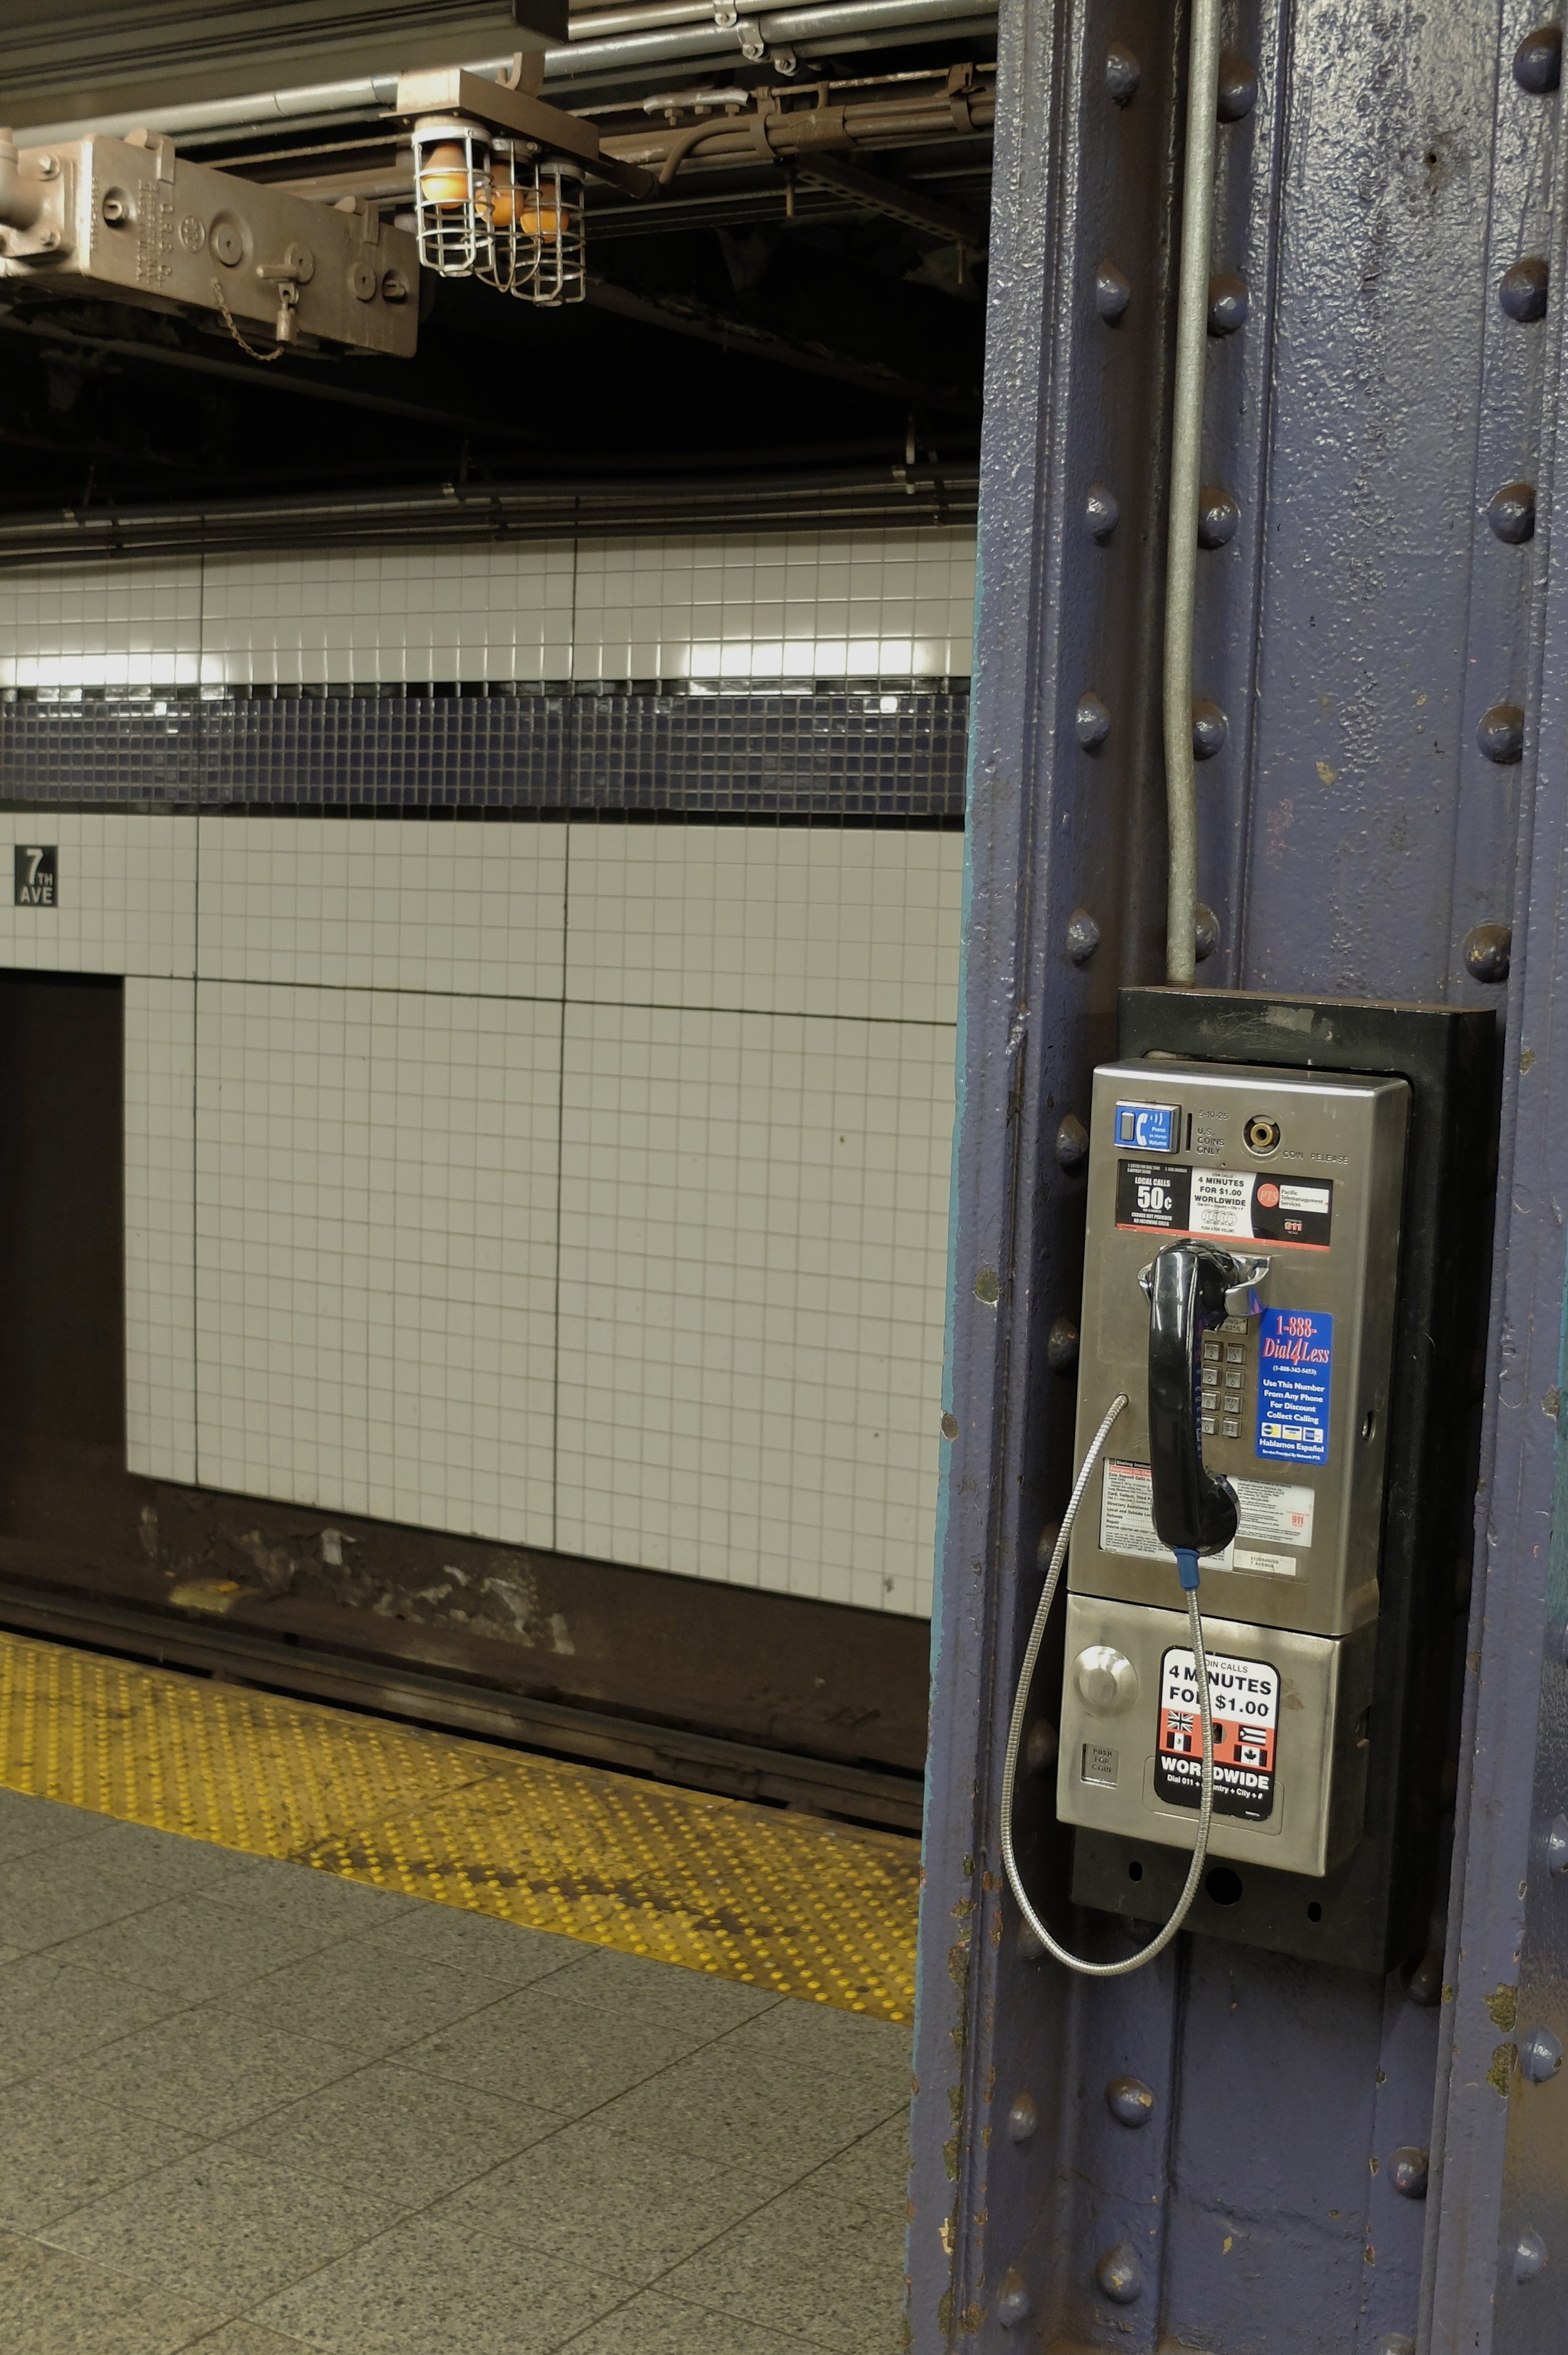  Or a phone call?  This is c. 2013.  These pay phones are all gone now. 